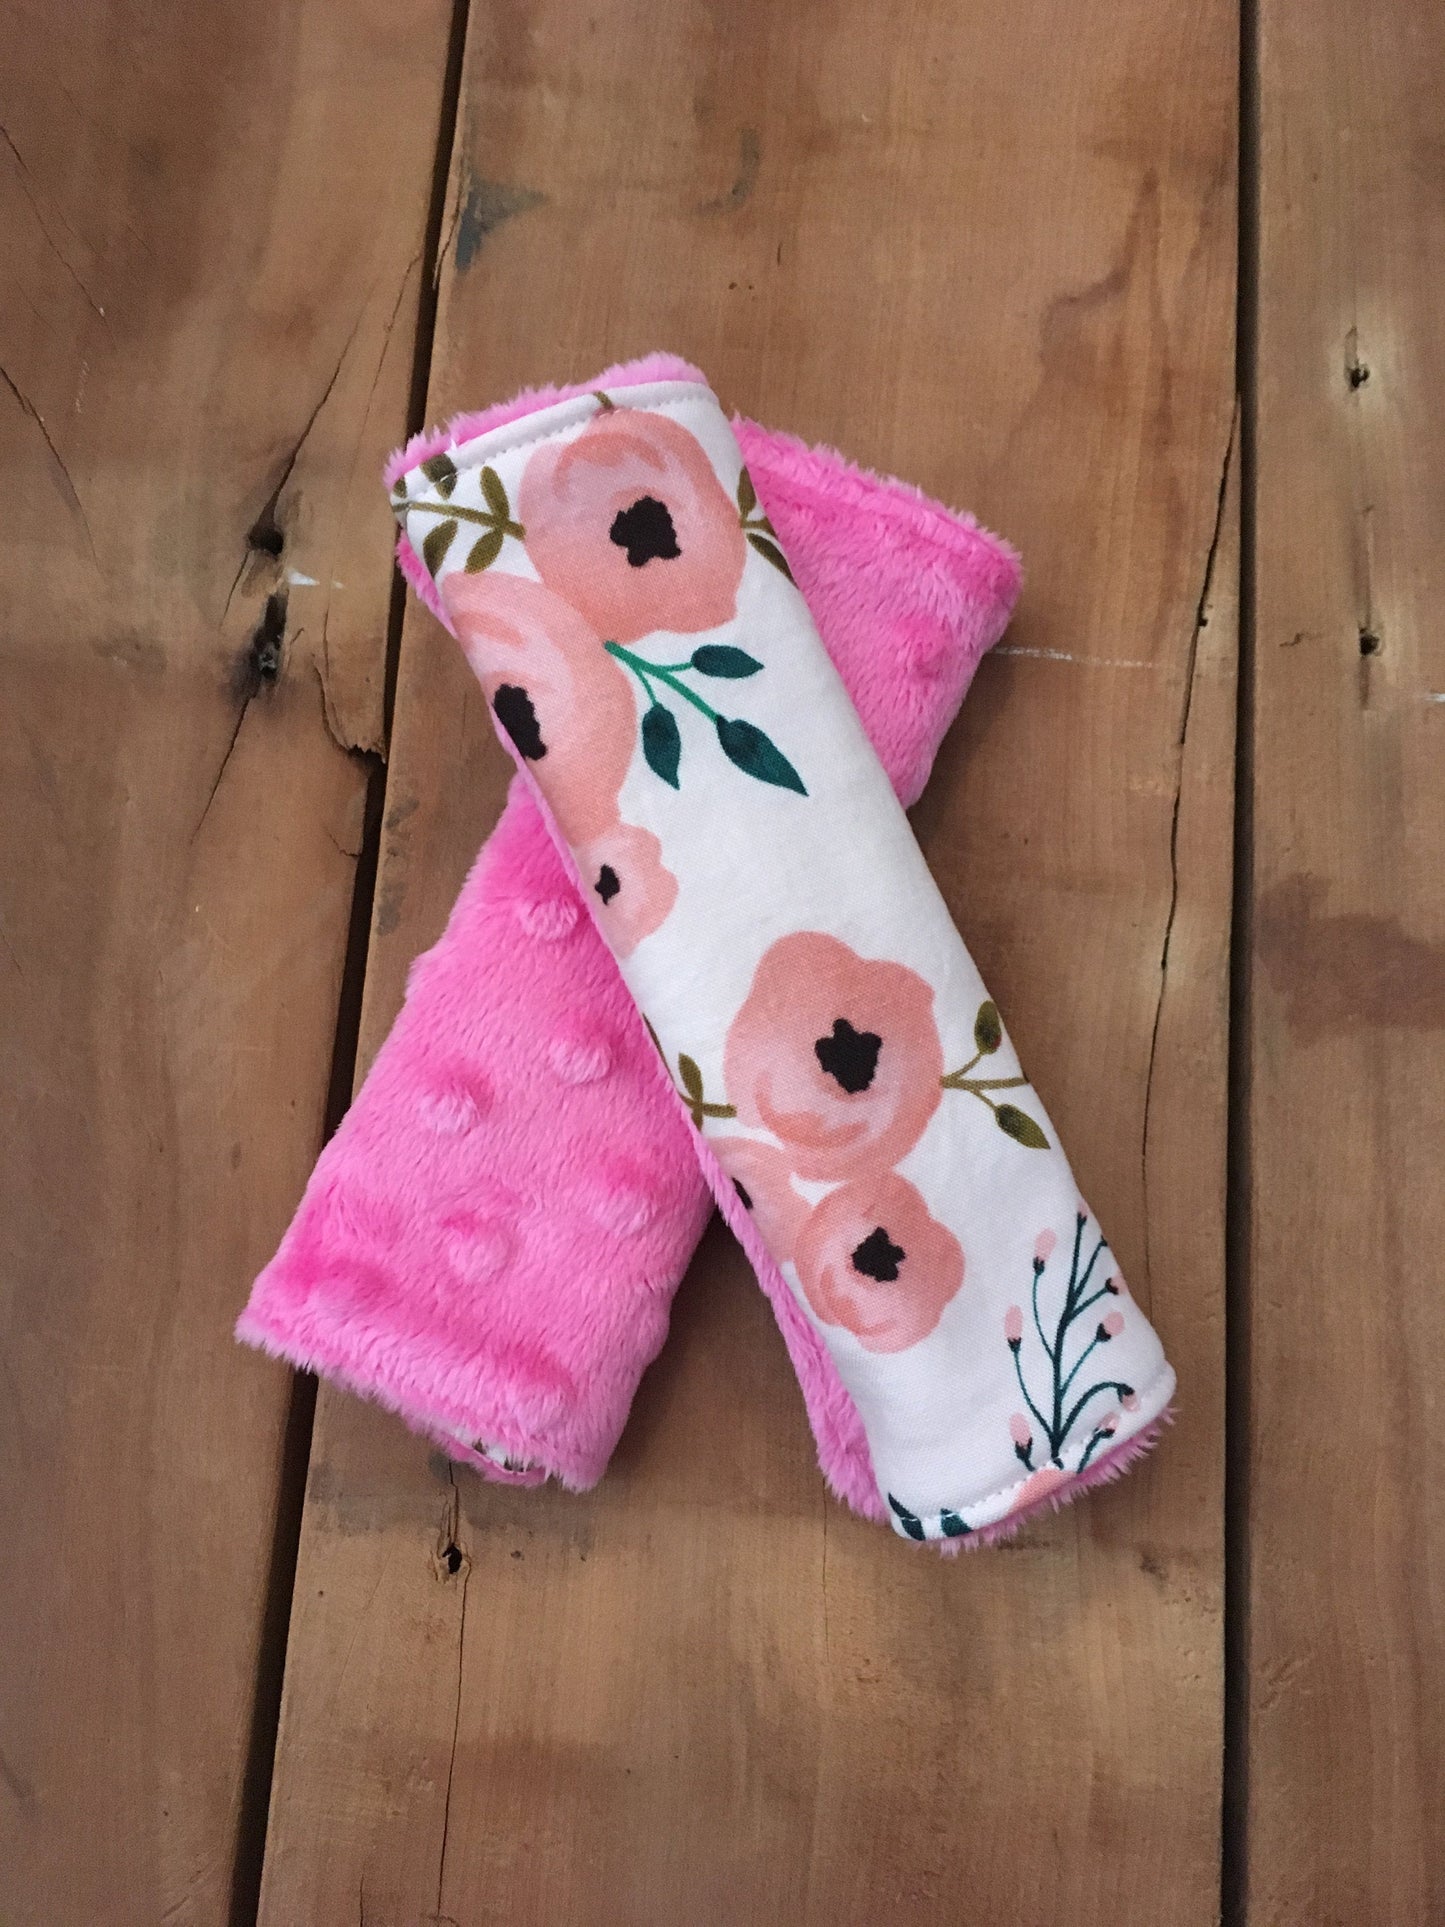 Pink Floral Seat Belt Covers for Kids, Gift for Toddler Girls